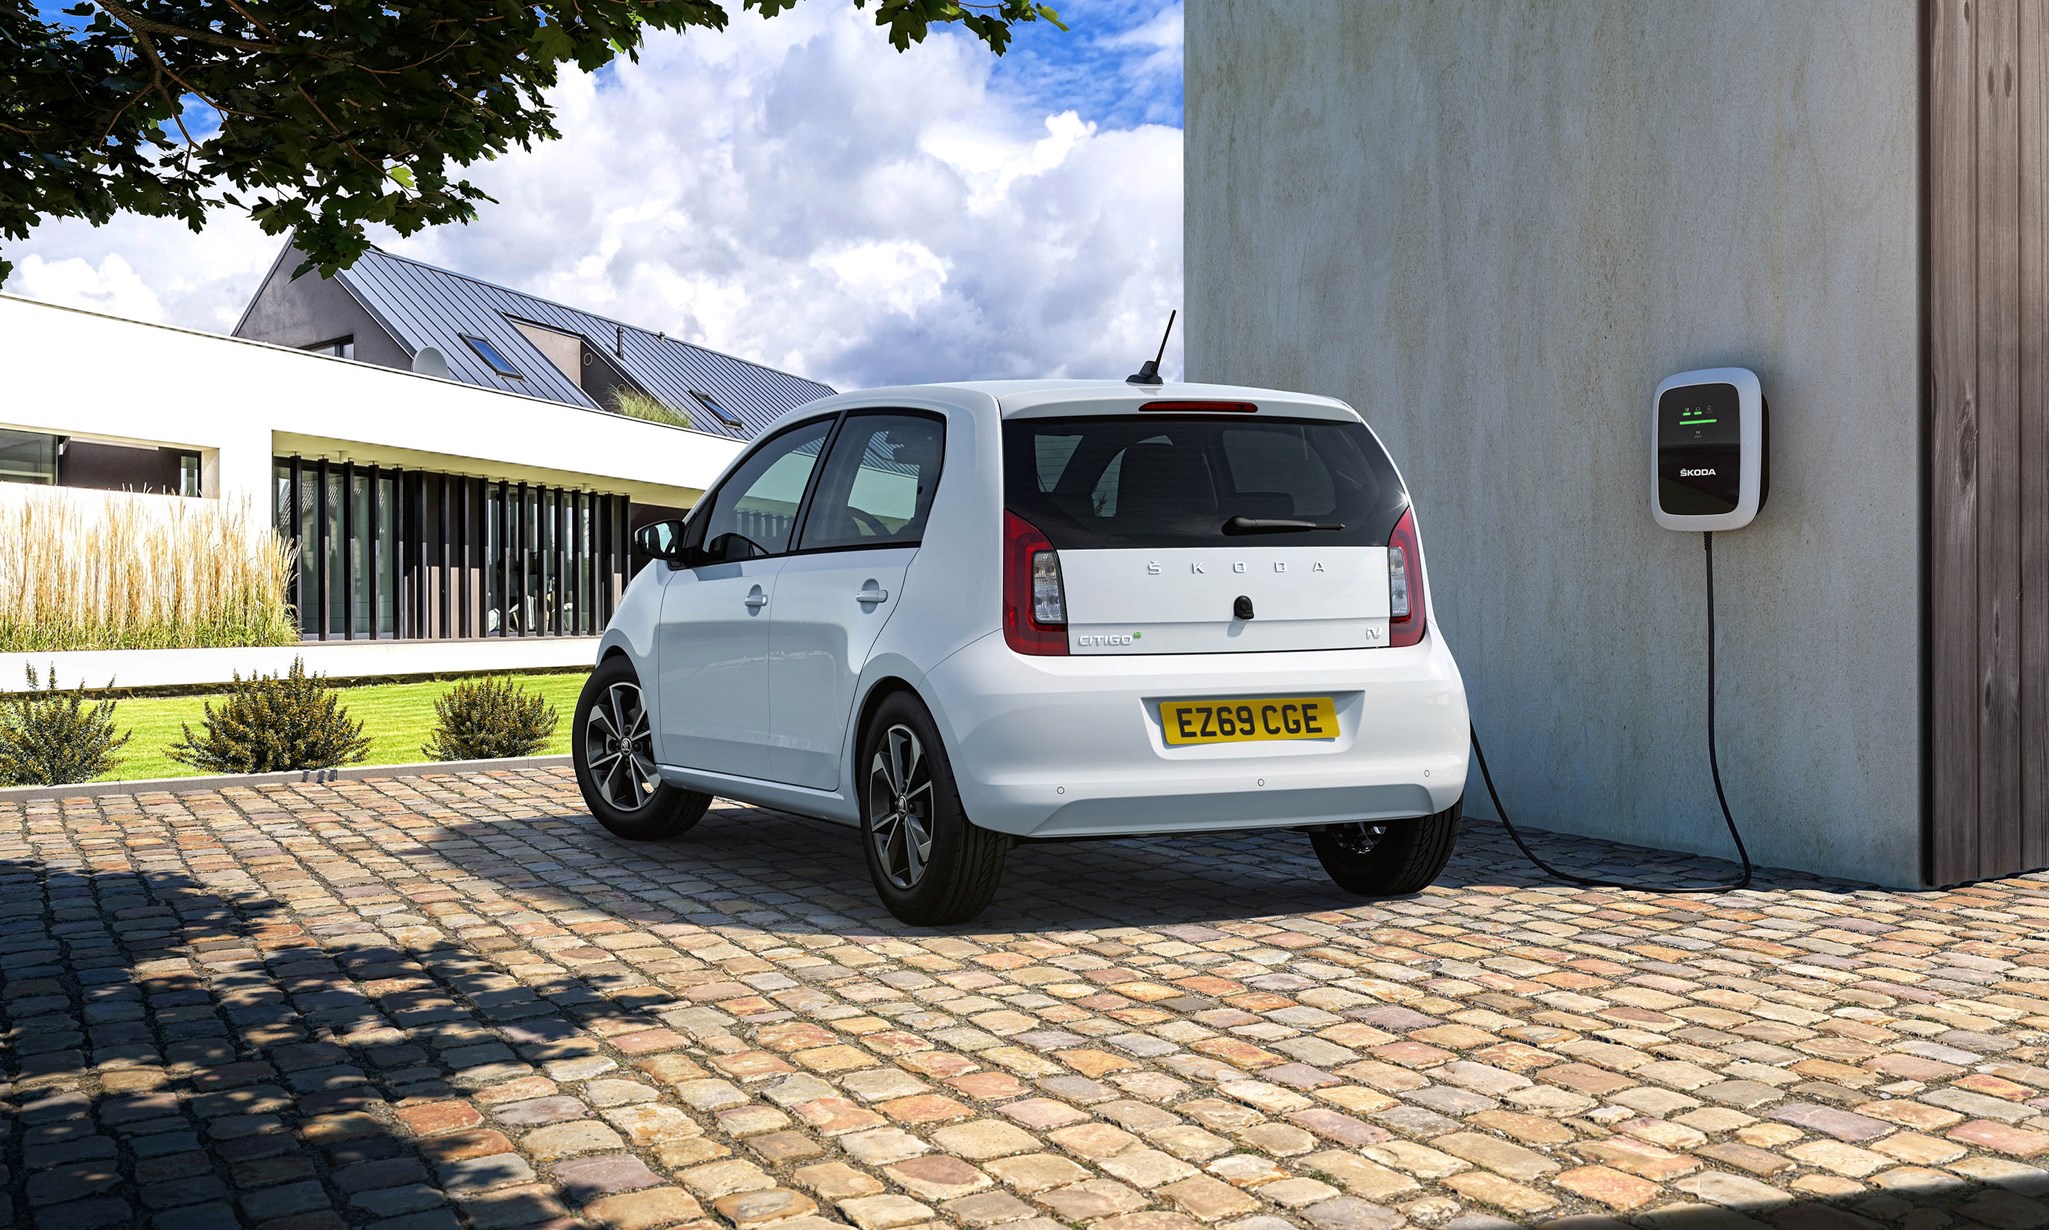 Skoda Citigo axed - but an electric replacement is in the works